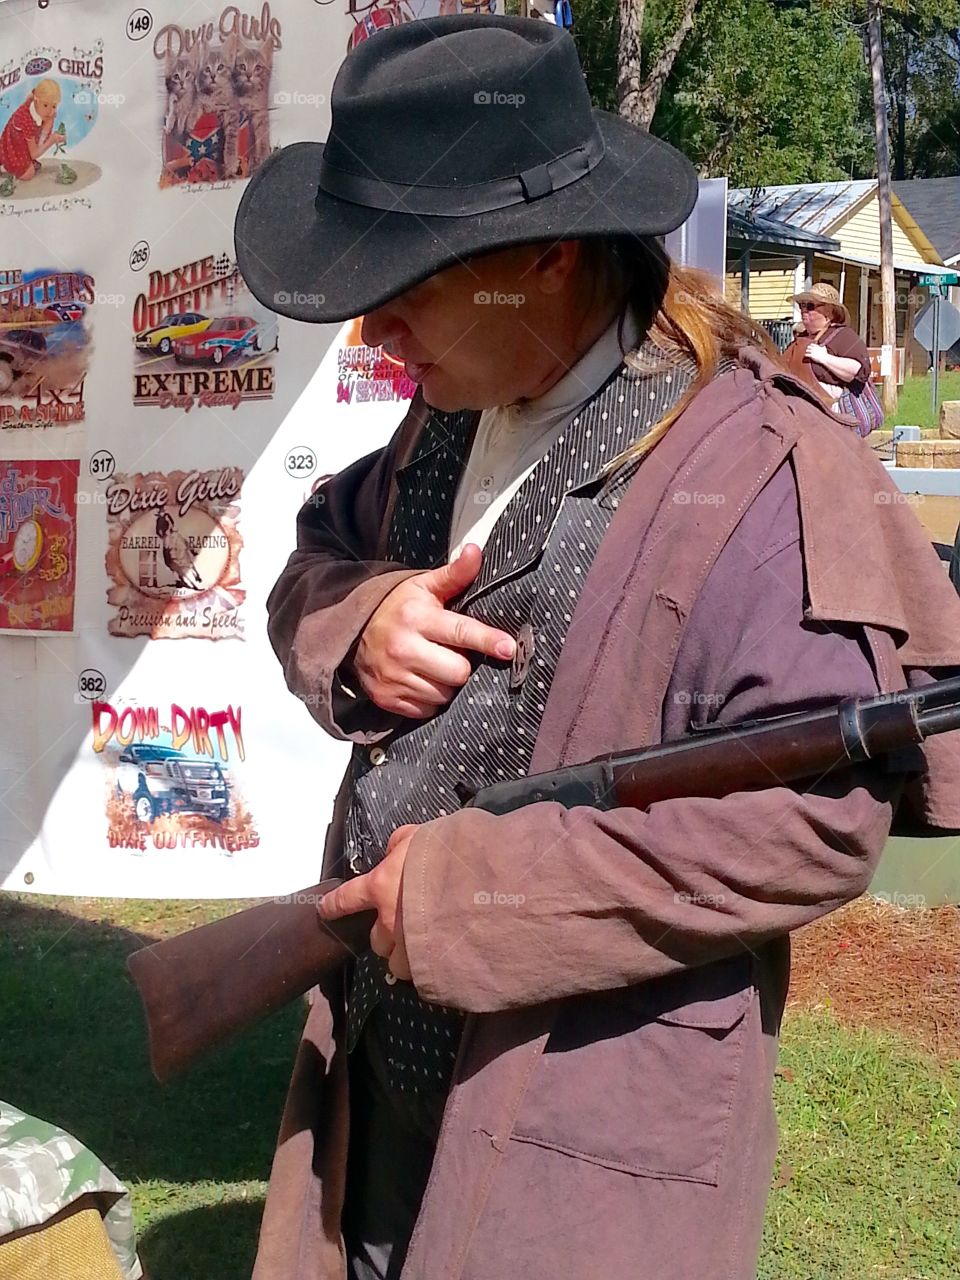 A man in full old time costume including hat and toting a gun in a reenactment from the civil war in 1800's. 